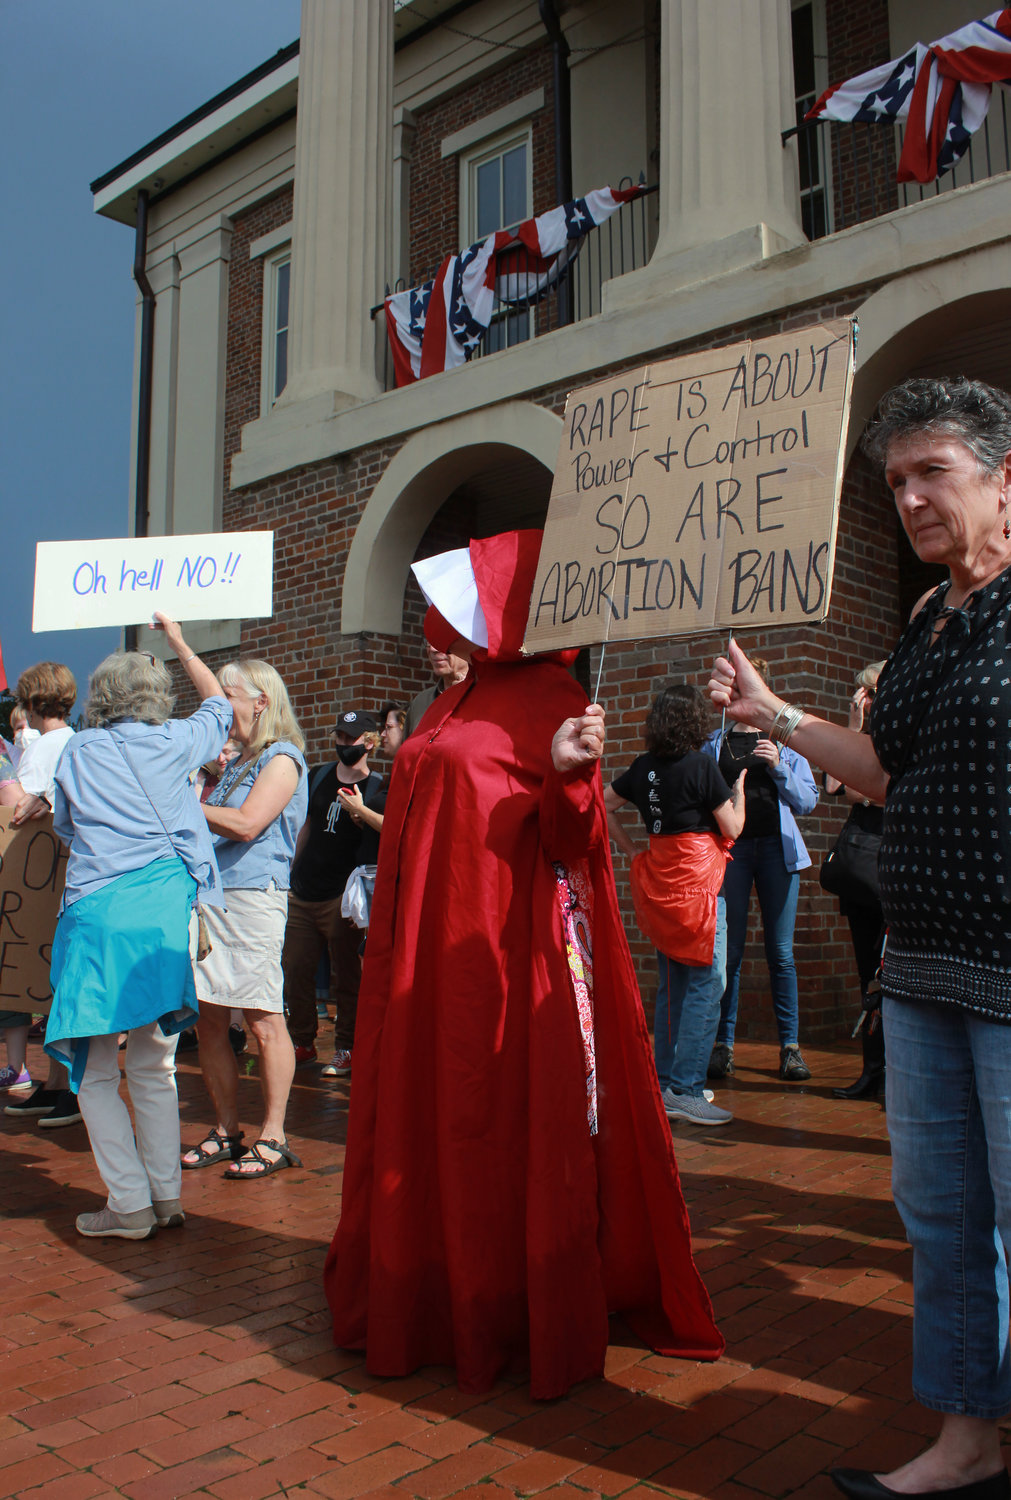 A women dressed as a Handmaid, a repressed female character based on Margaret Atwood’s novel 'The Handmaid’s Tale,' during the abortion and women’s rights protest on Monday at the Historic Courthouse in Pittsboro.